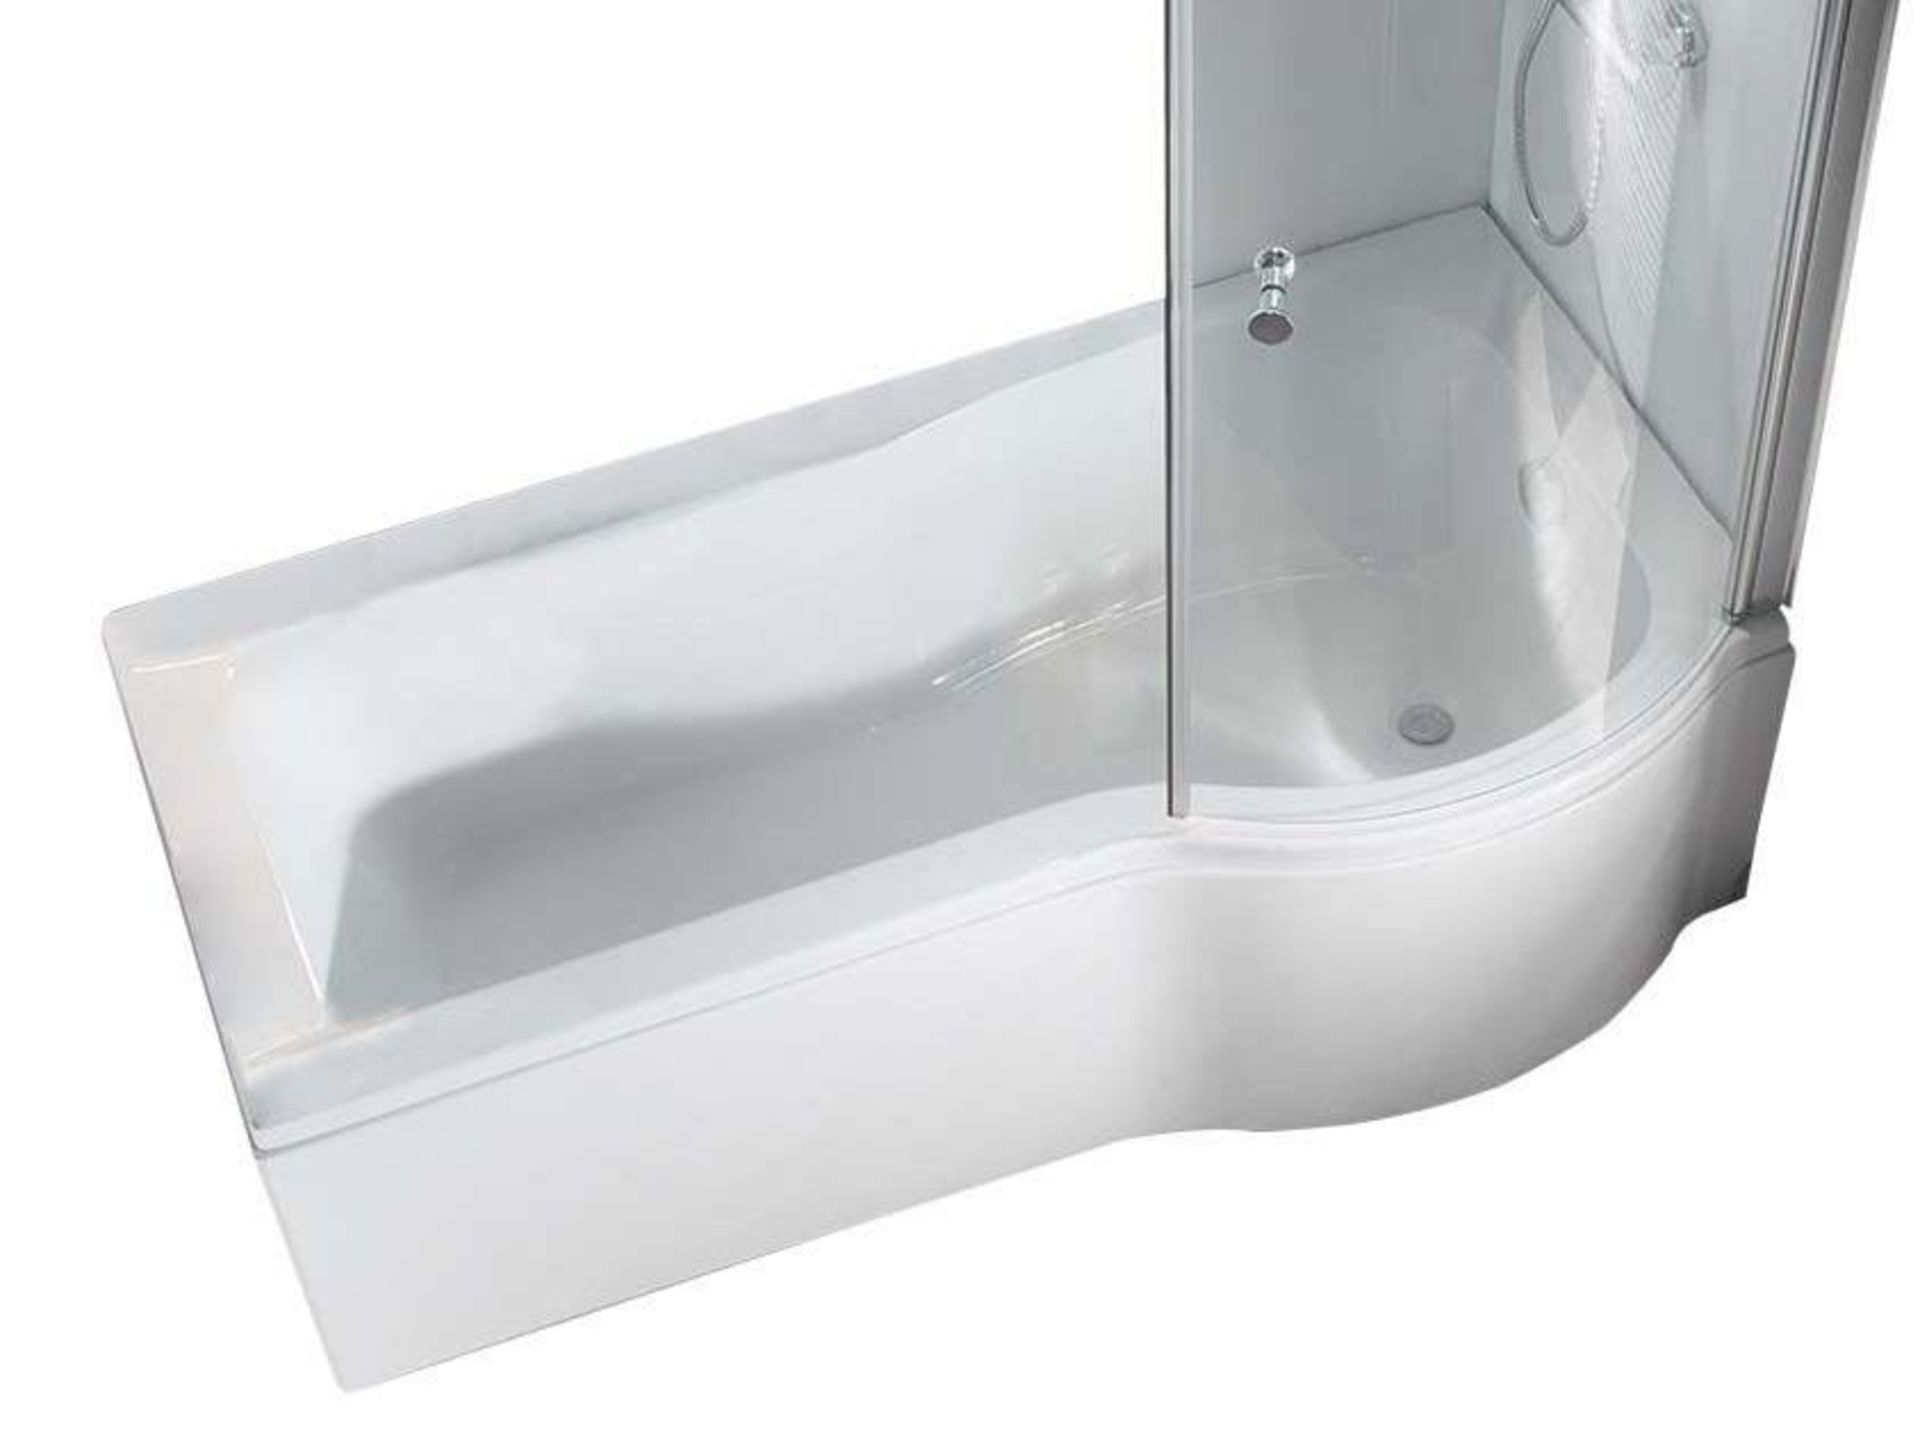 1 x 'Galaxia' Premier Finish 1700mm P-Shape Right-Hand Shower Bath + Front Panel - New/Unused Stock - Image 2 of 2